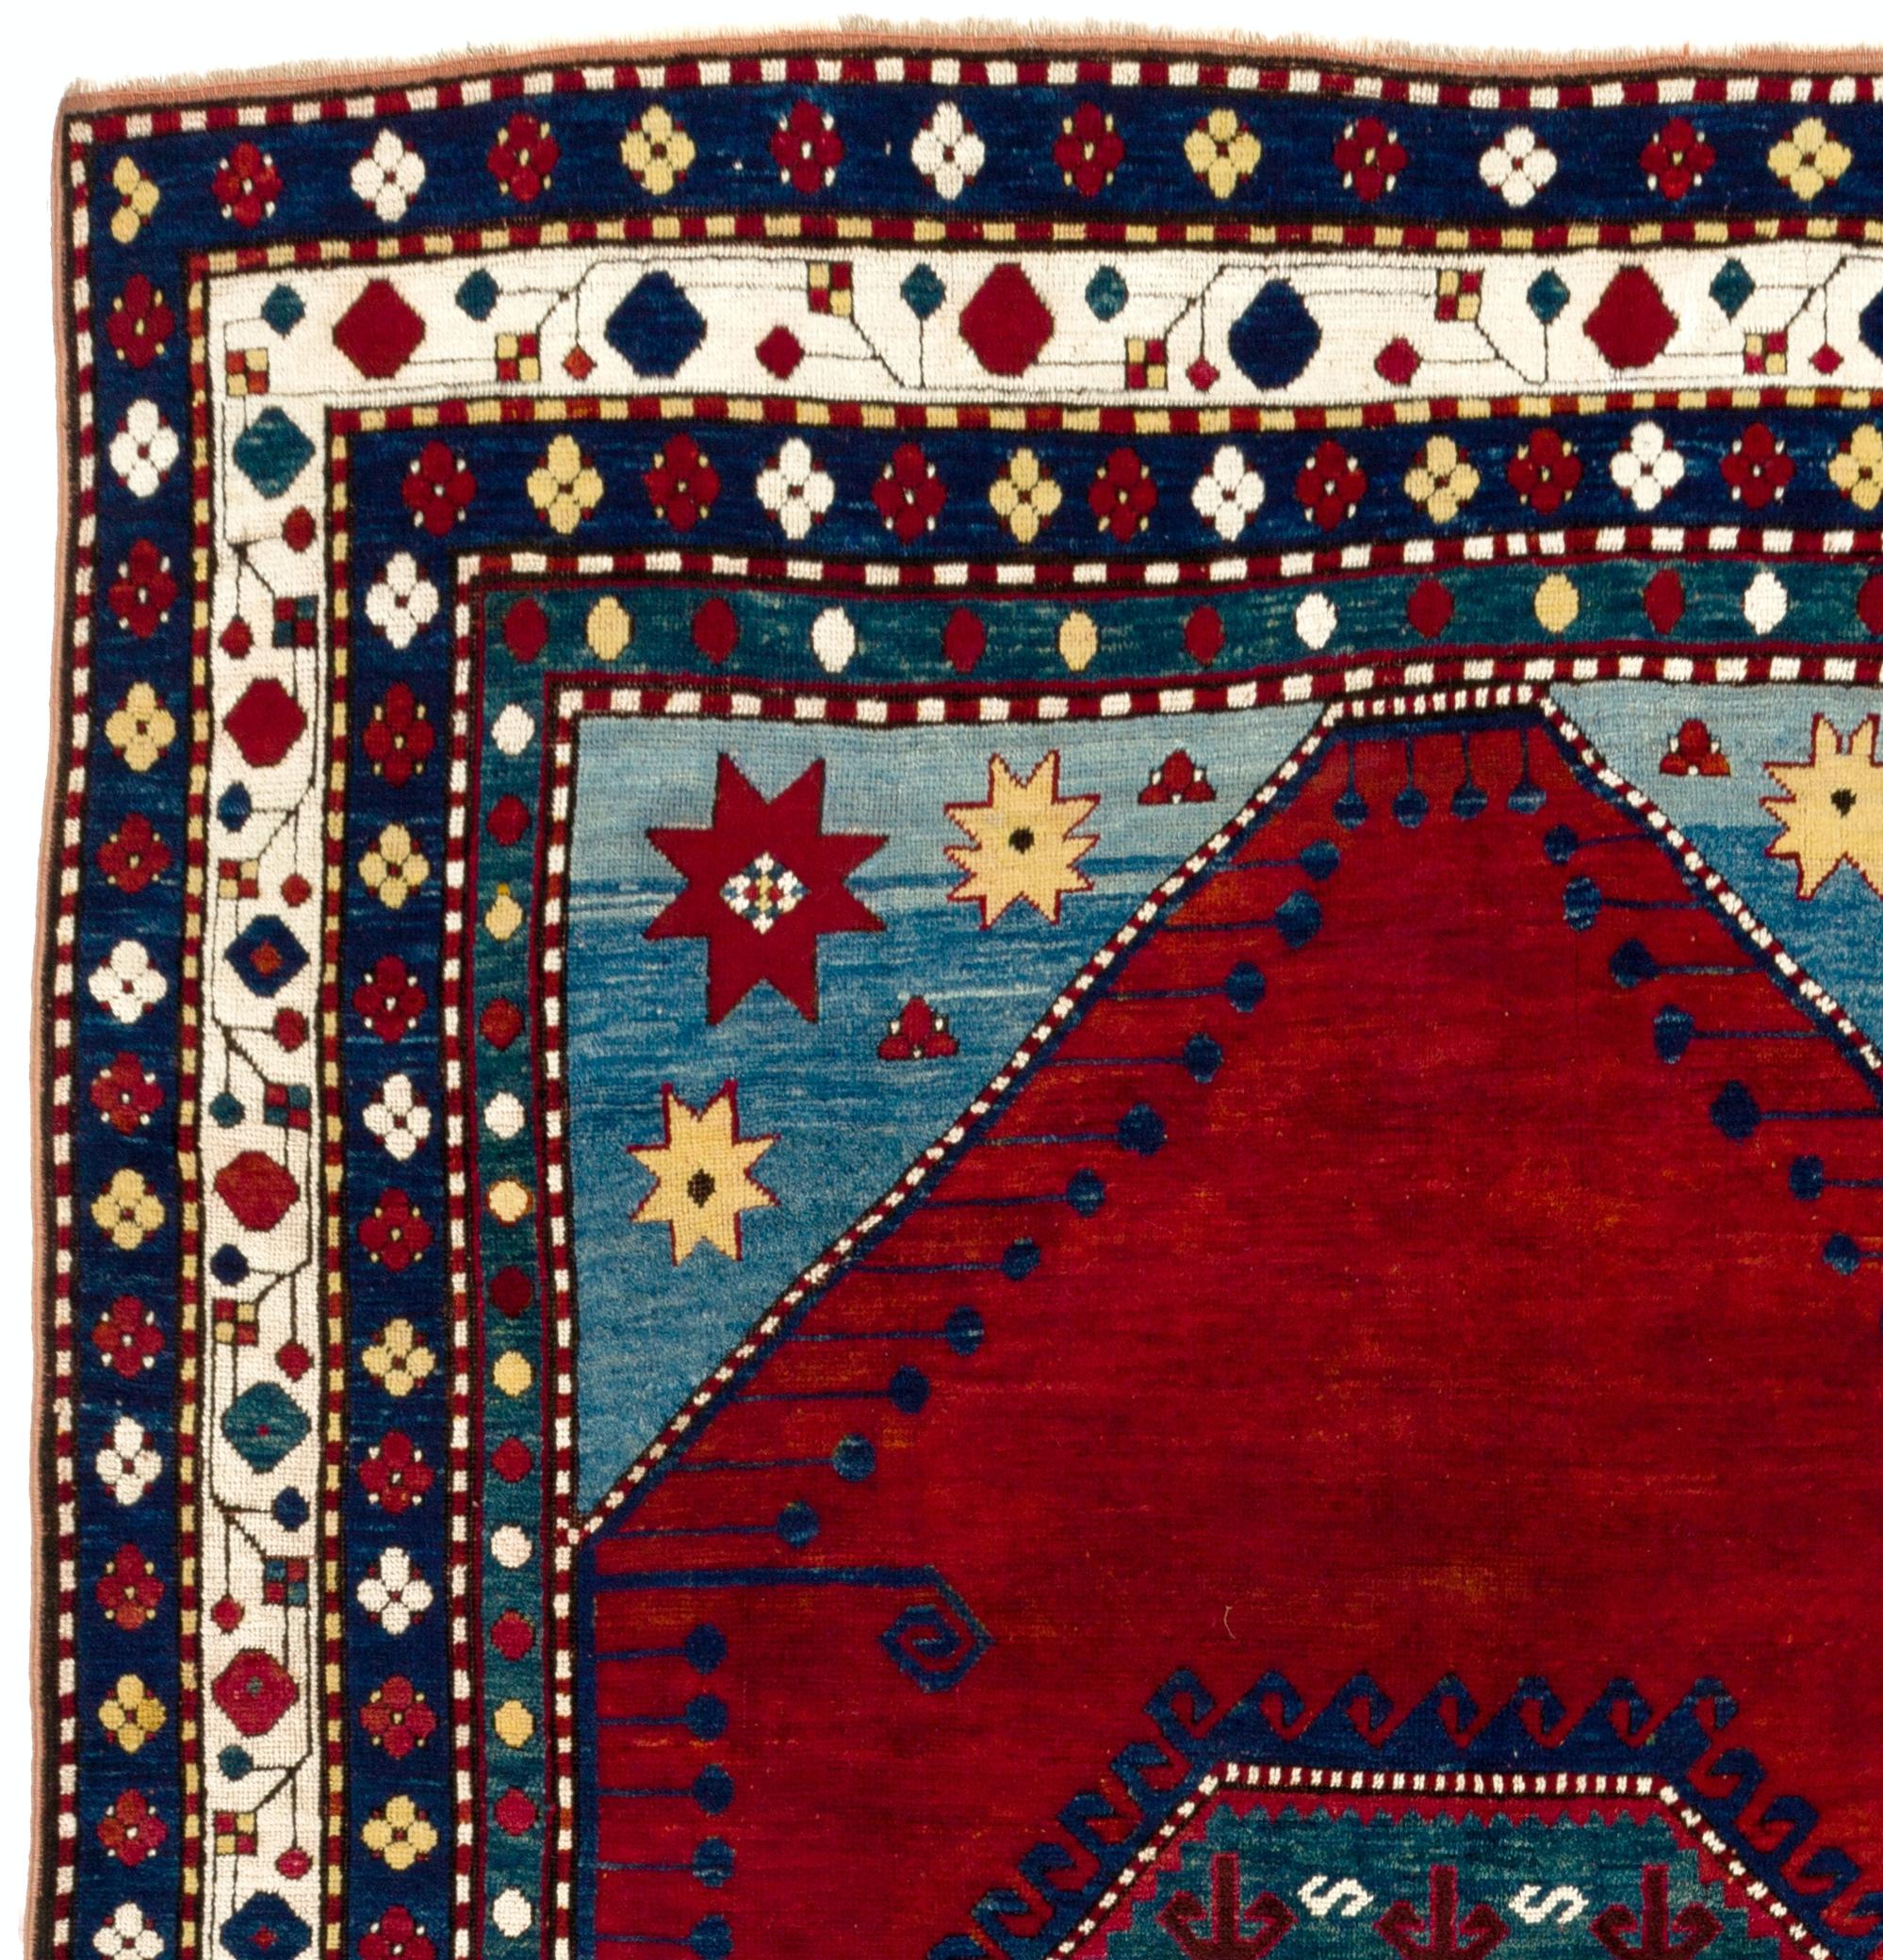 This exquisite South Caucasian Kazak rug features a central medallion rendered in a serene dark sea green layered with contrasting tones of madder and white in the form of motifs such as ram's horns, dragons and hooks set against a very vivid and